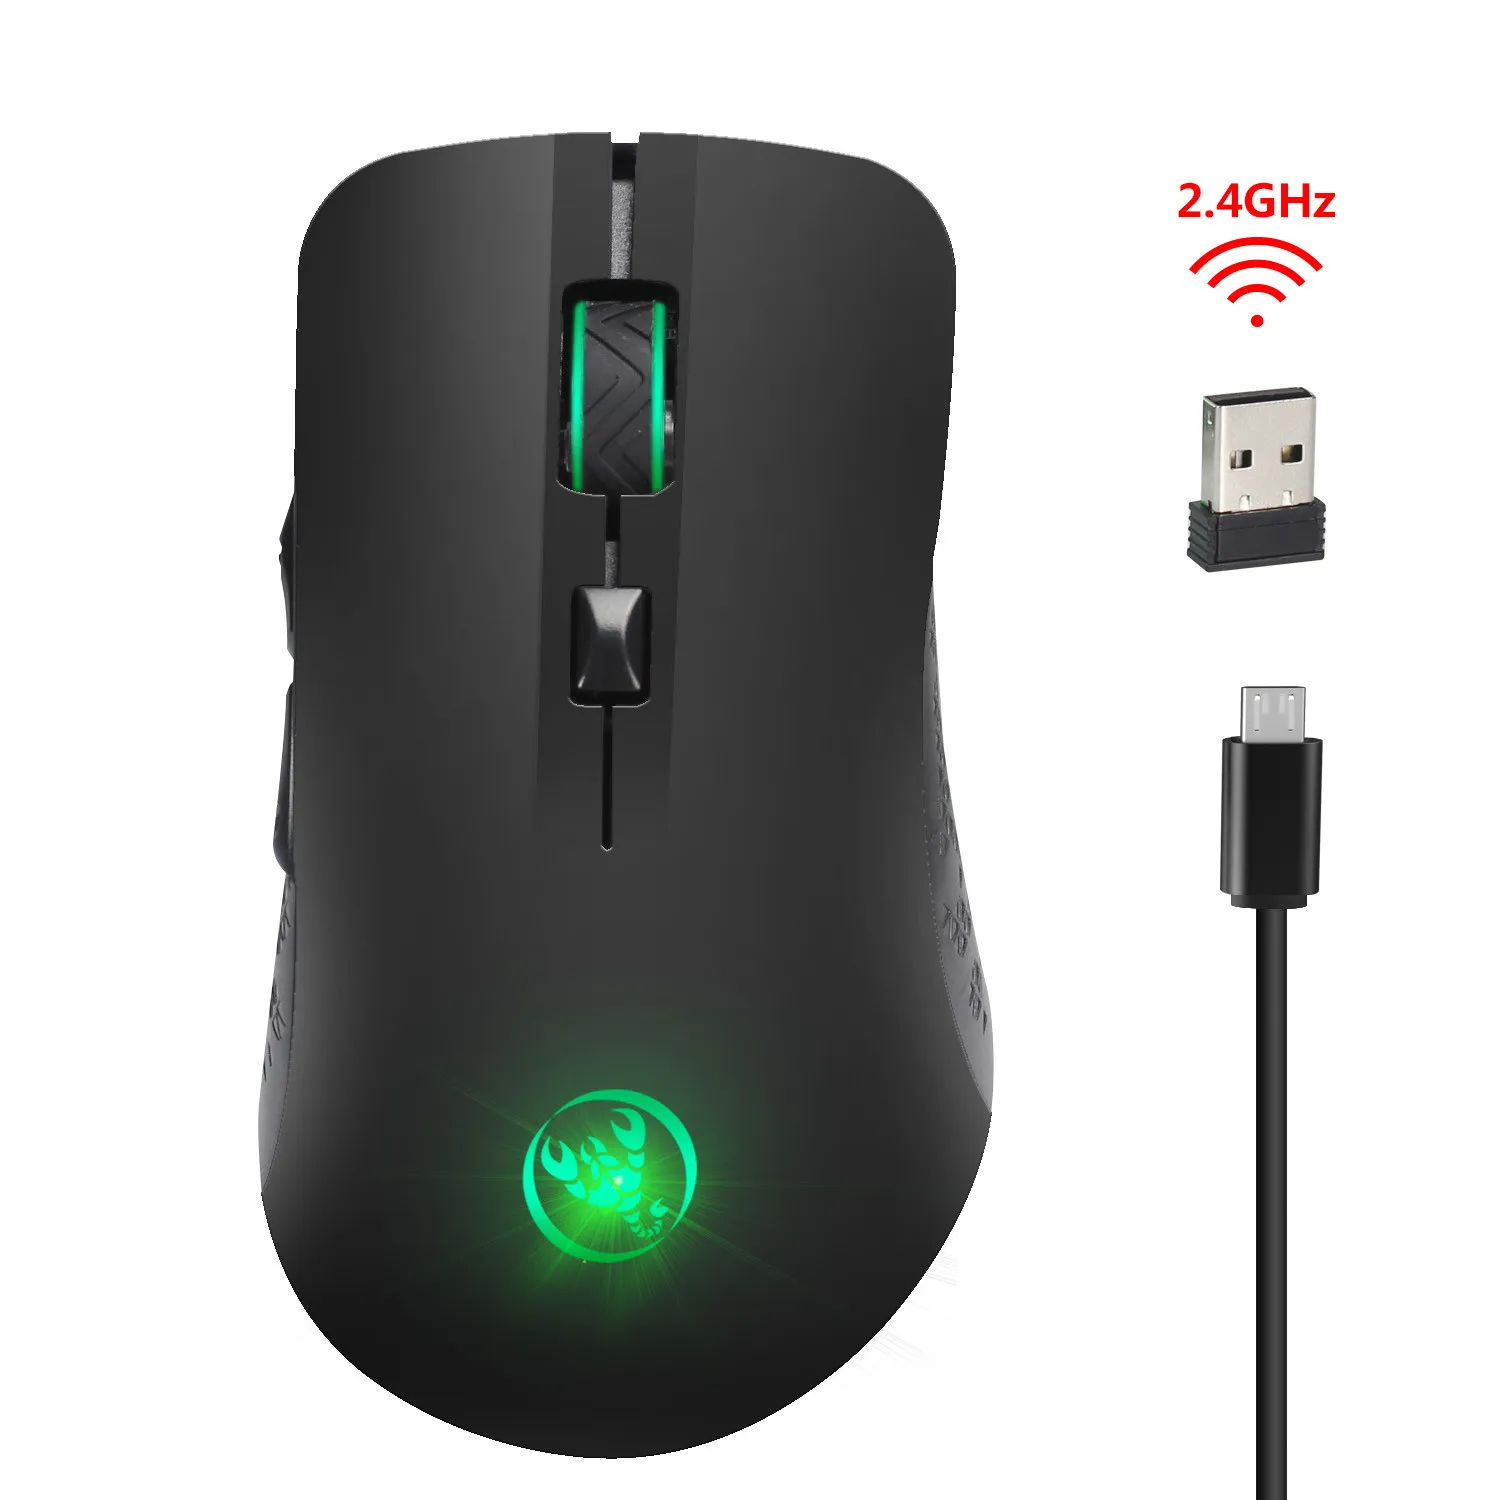 M20 Wireless Gaming Mouse 2.4GHz 2400DPI Optical USB LED Ergonomic Charging Mice for gamers computer PC laptop keyboard | Компьютеры и